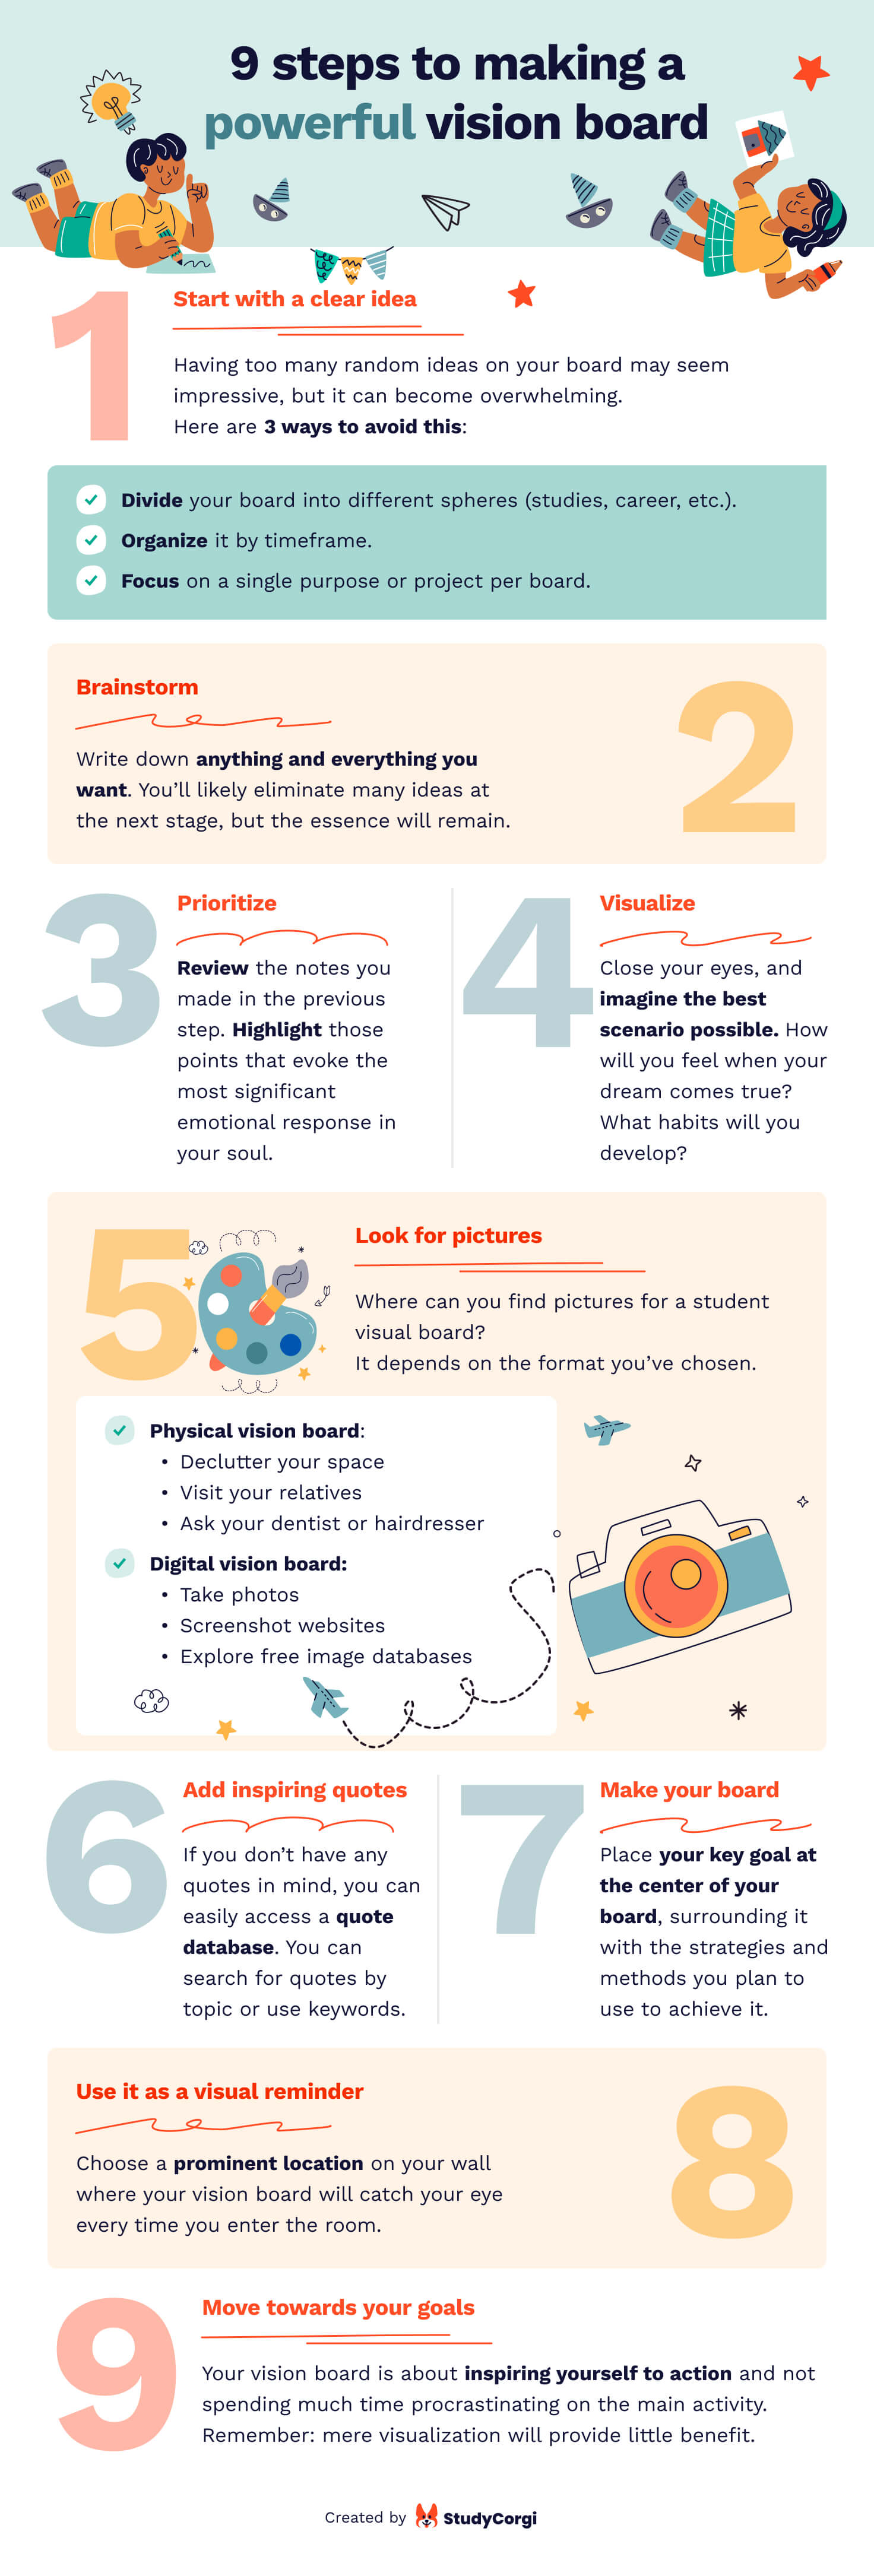 The infographic lists the 9 tips to making a powerful academic vision board.